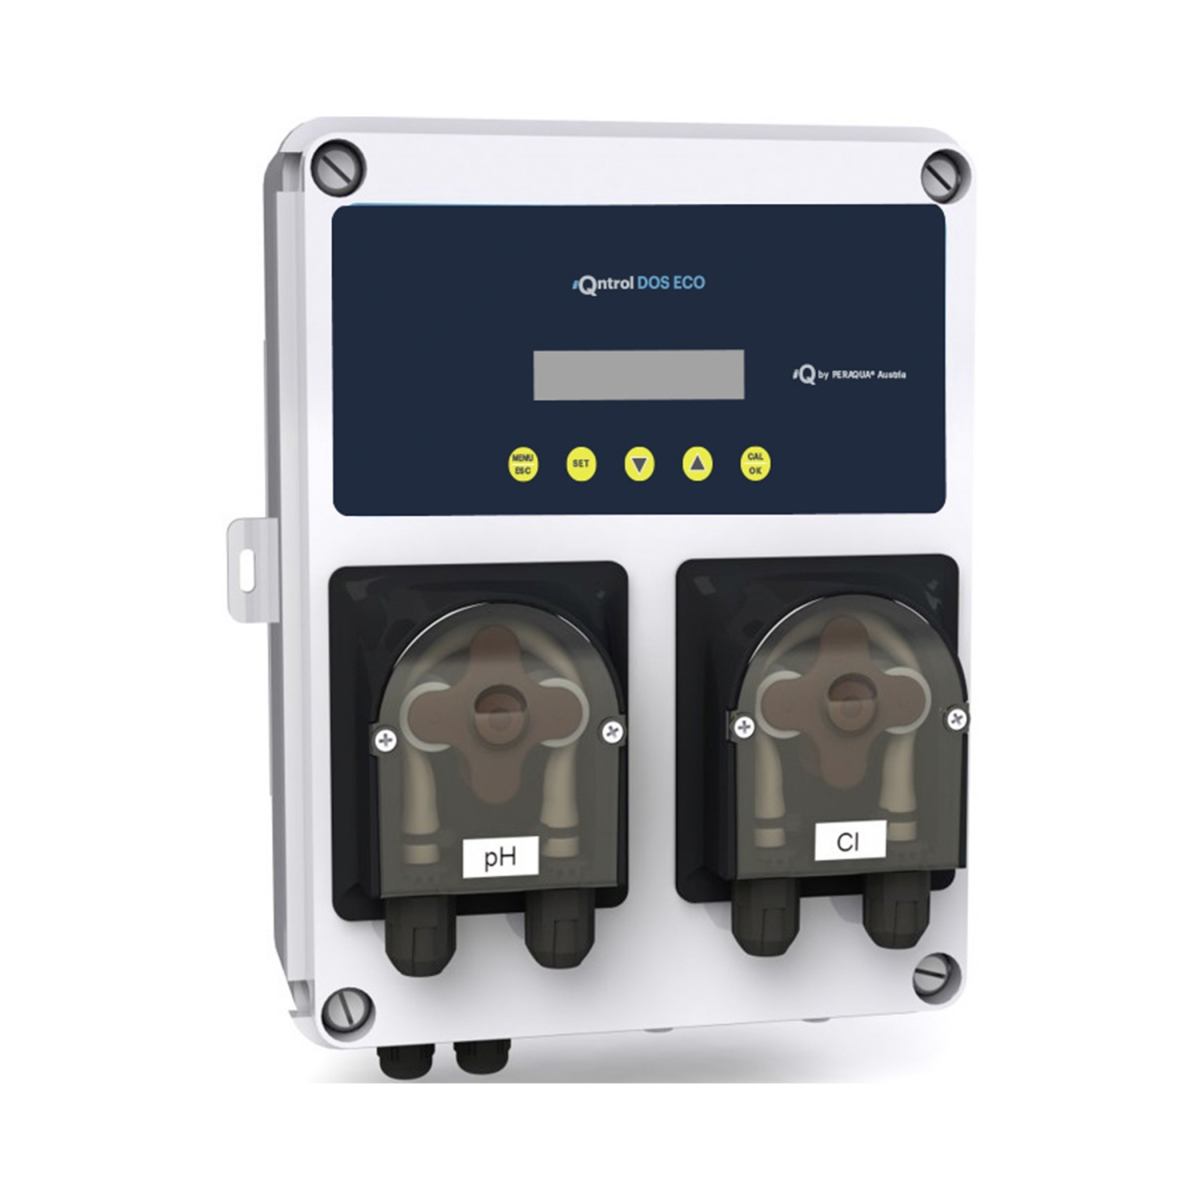 iQntrol dosing system  DOS-ECO WEB pH Redox 1,5l/h pH minus and chlorine dosing, incl. 2 in 1 sensor holder, d50 & d63 iQntrol dosing system  DOS-ECO WEB pH Redox 1,5l/h pH minus and chlorine dosing, incl. 2 in 1 sensor holder, d50 & d63